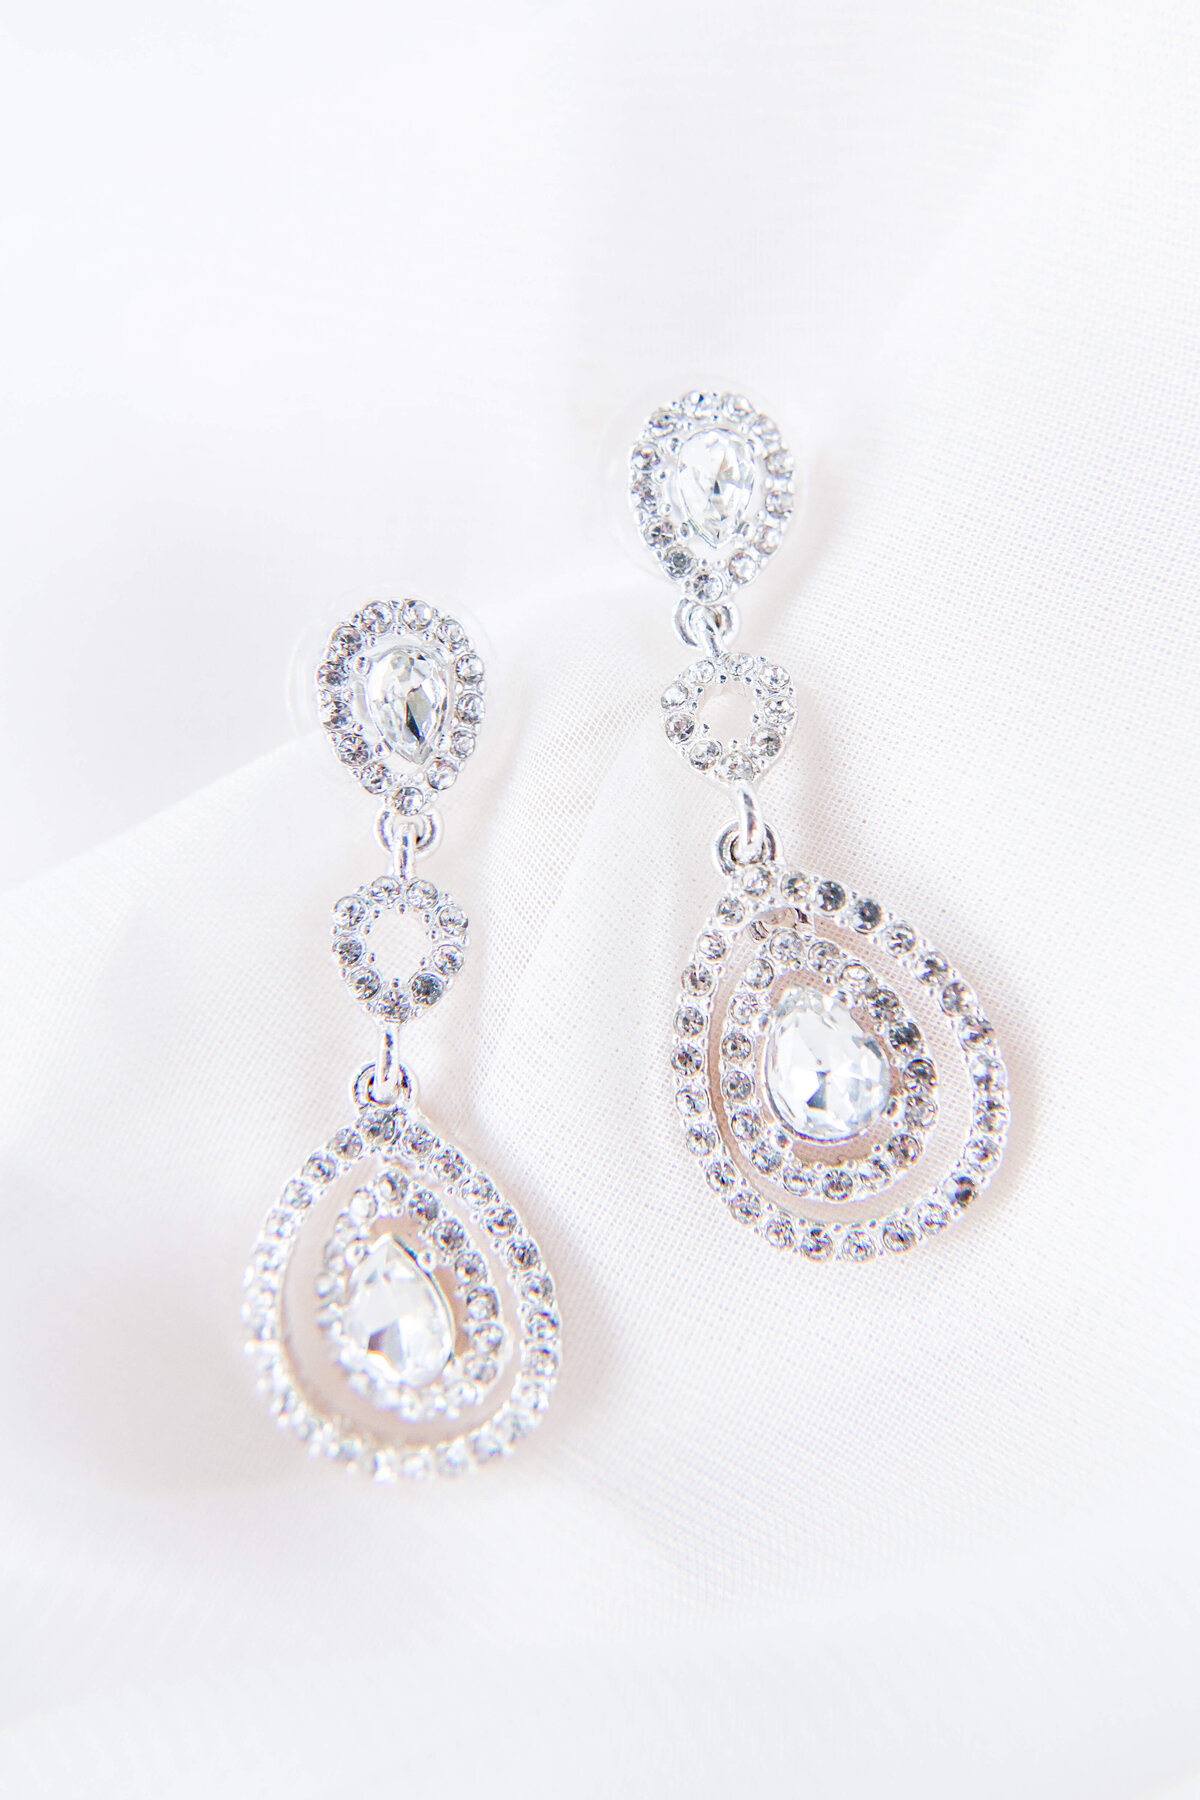 Bridal-Earrings-Details-by-Bethany-Lane-Photography